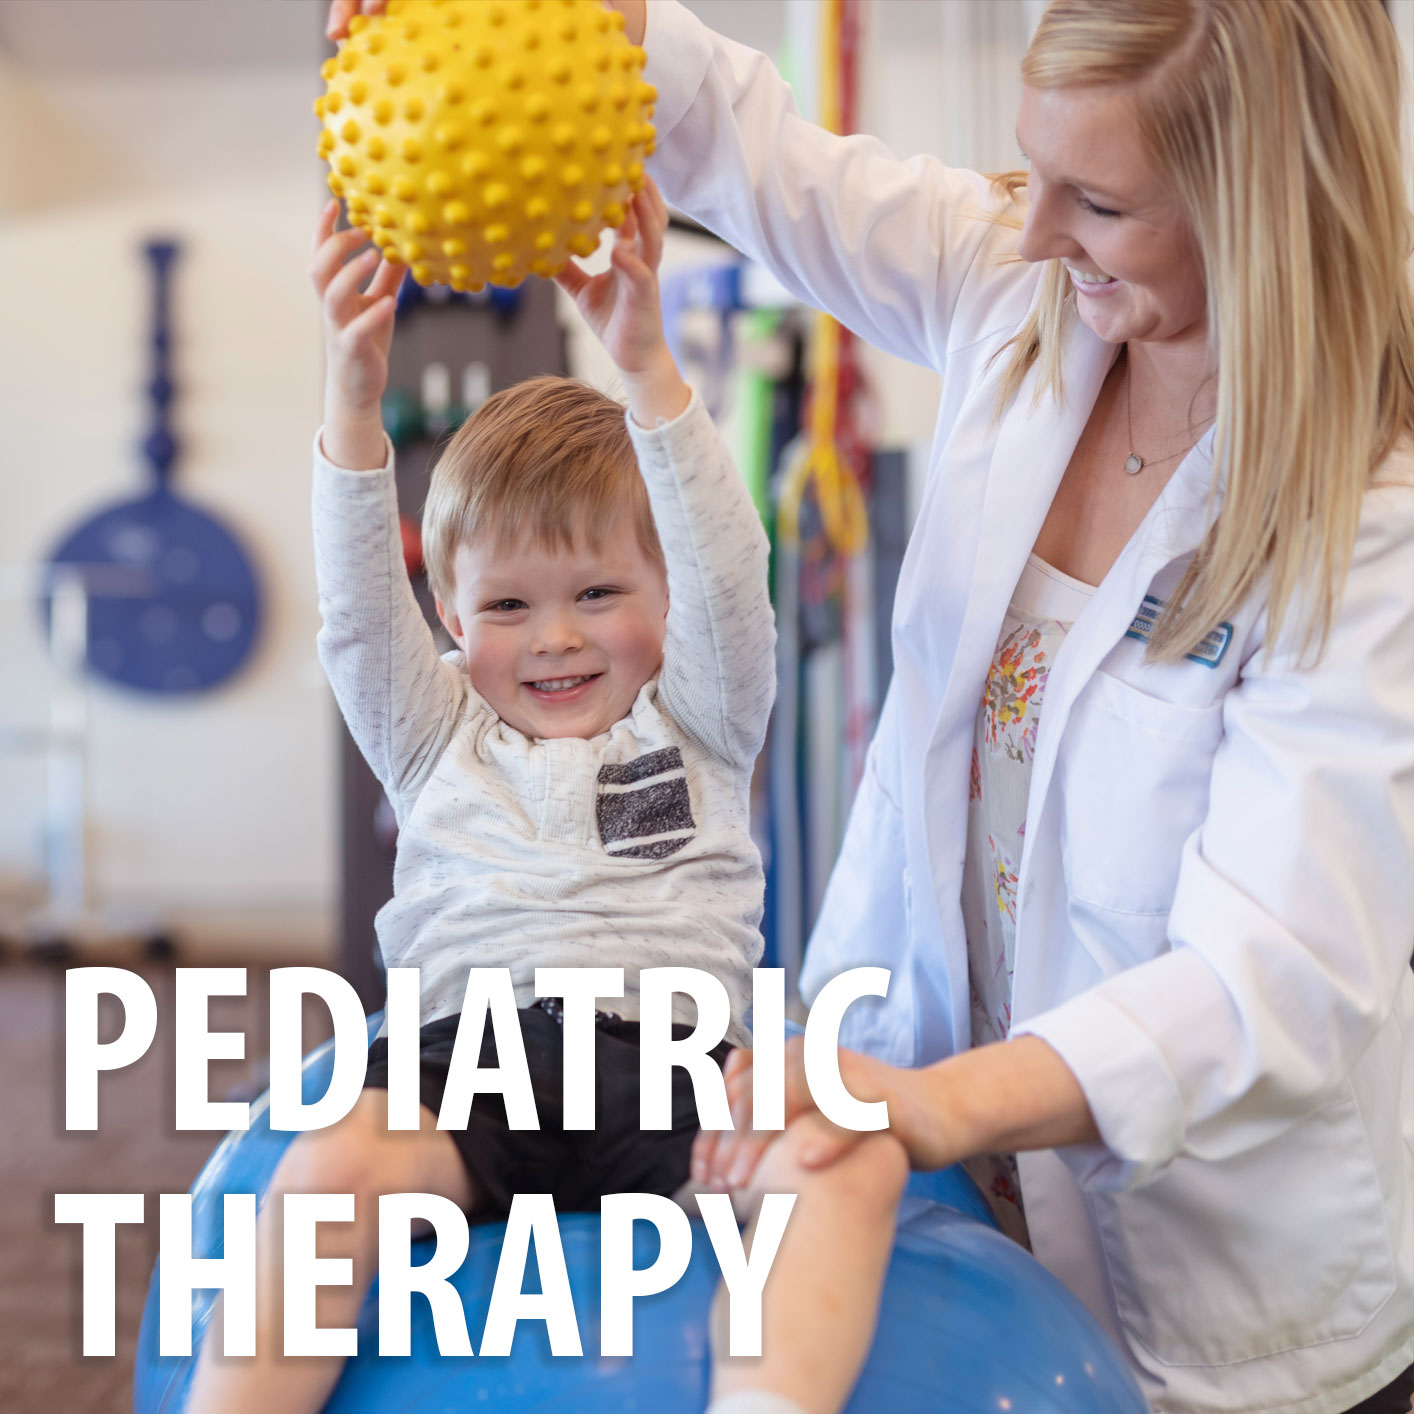 Child receiving Pediatric Therapy from Physical Therapist